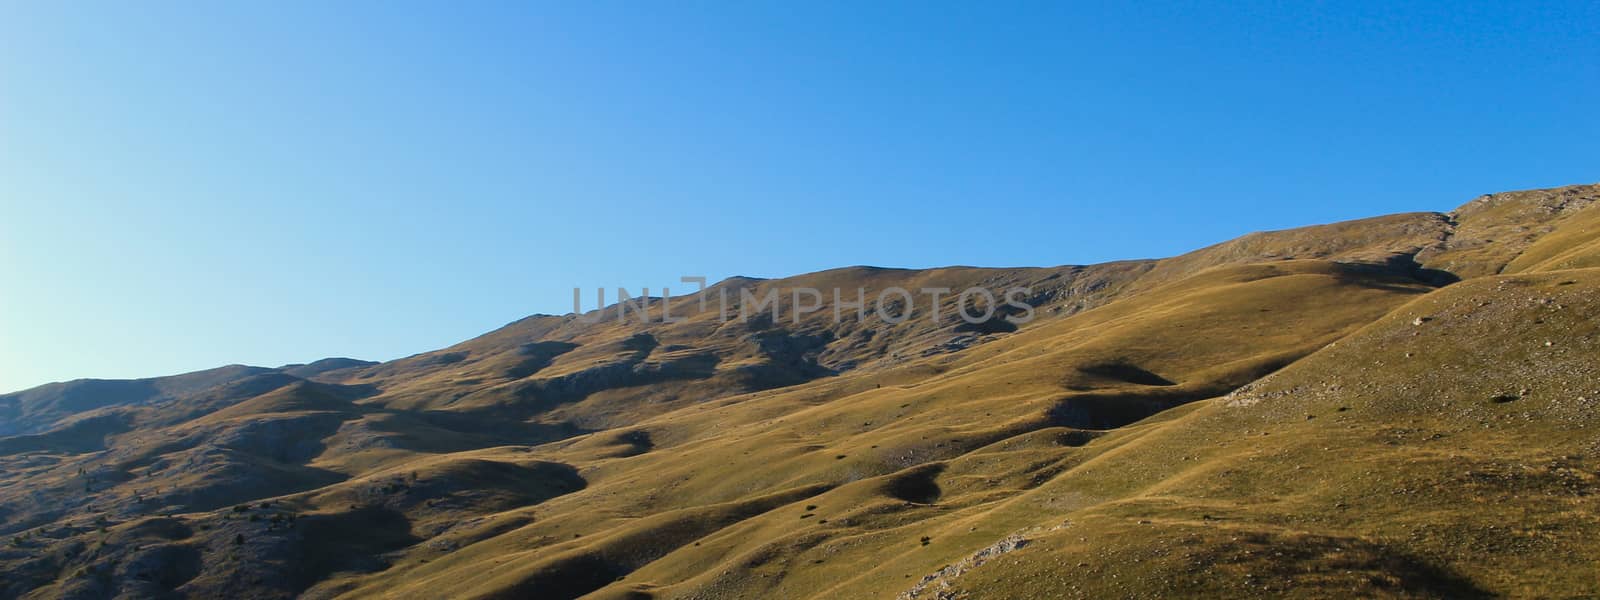 Banner. Mountain in the fall before sunset. Landscape of Bjelasnica mountain, meadows, pastures, grass, stones, sky. Simple but magnificent landscape view. Bjelasnica Mountain, Bosnia and Herzegovina.